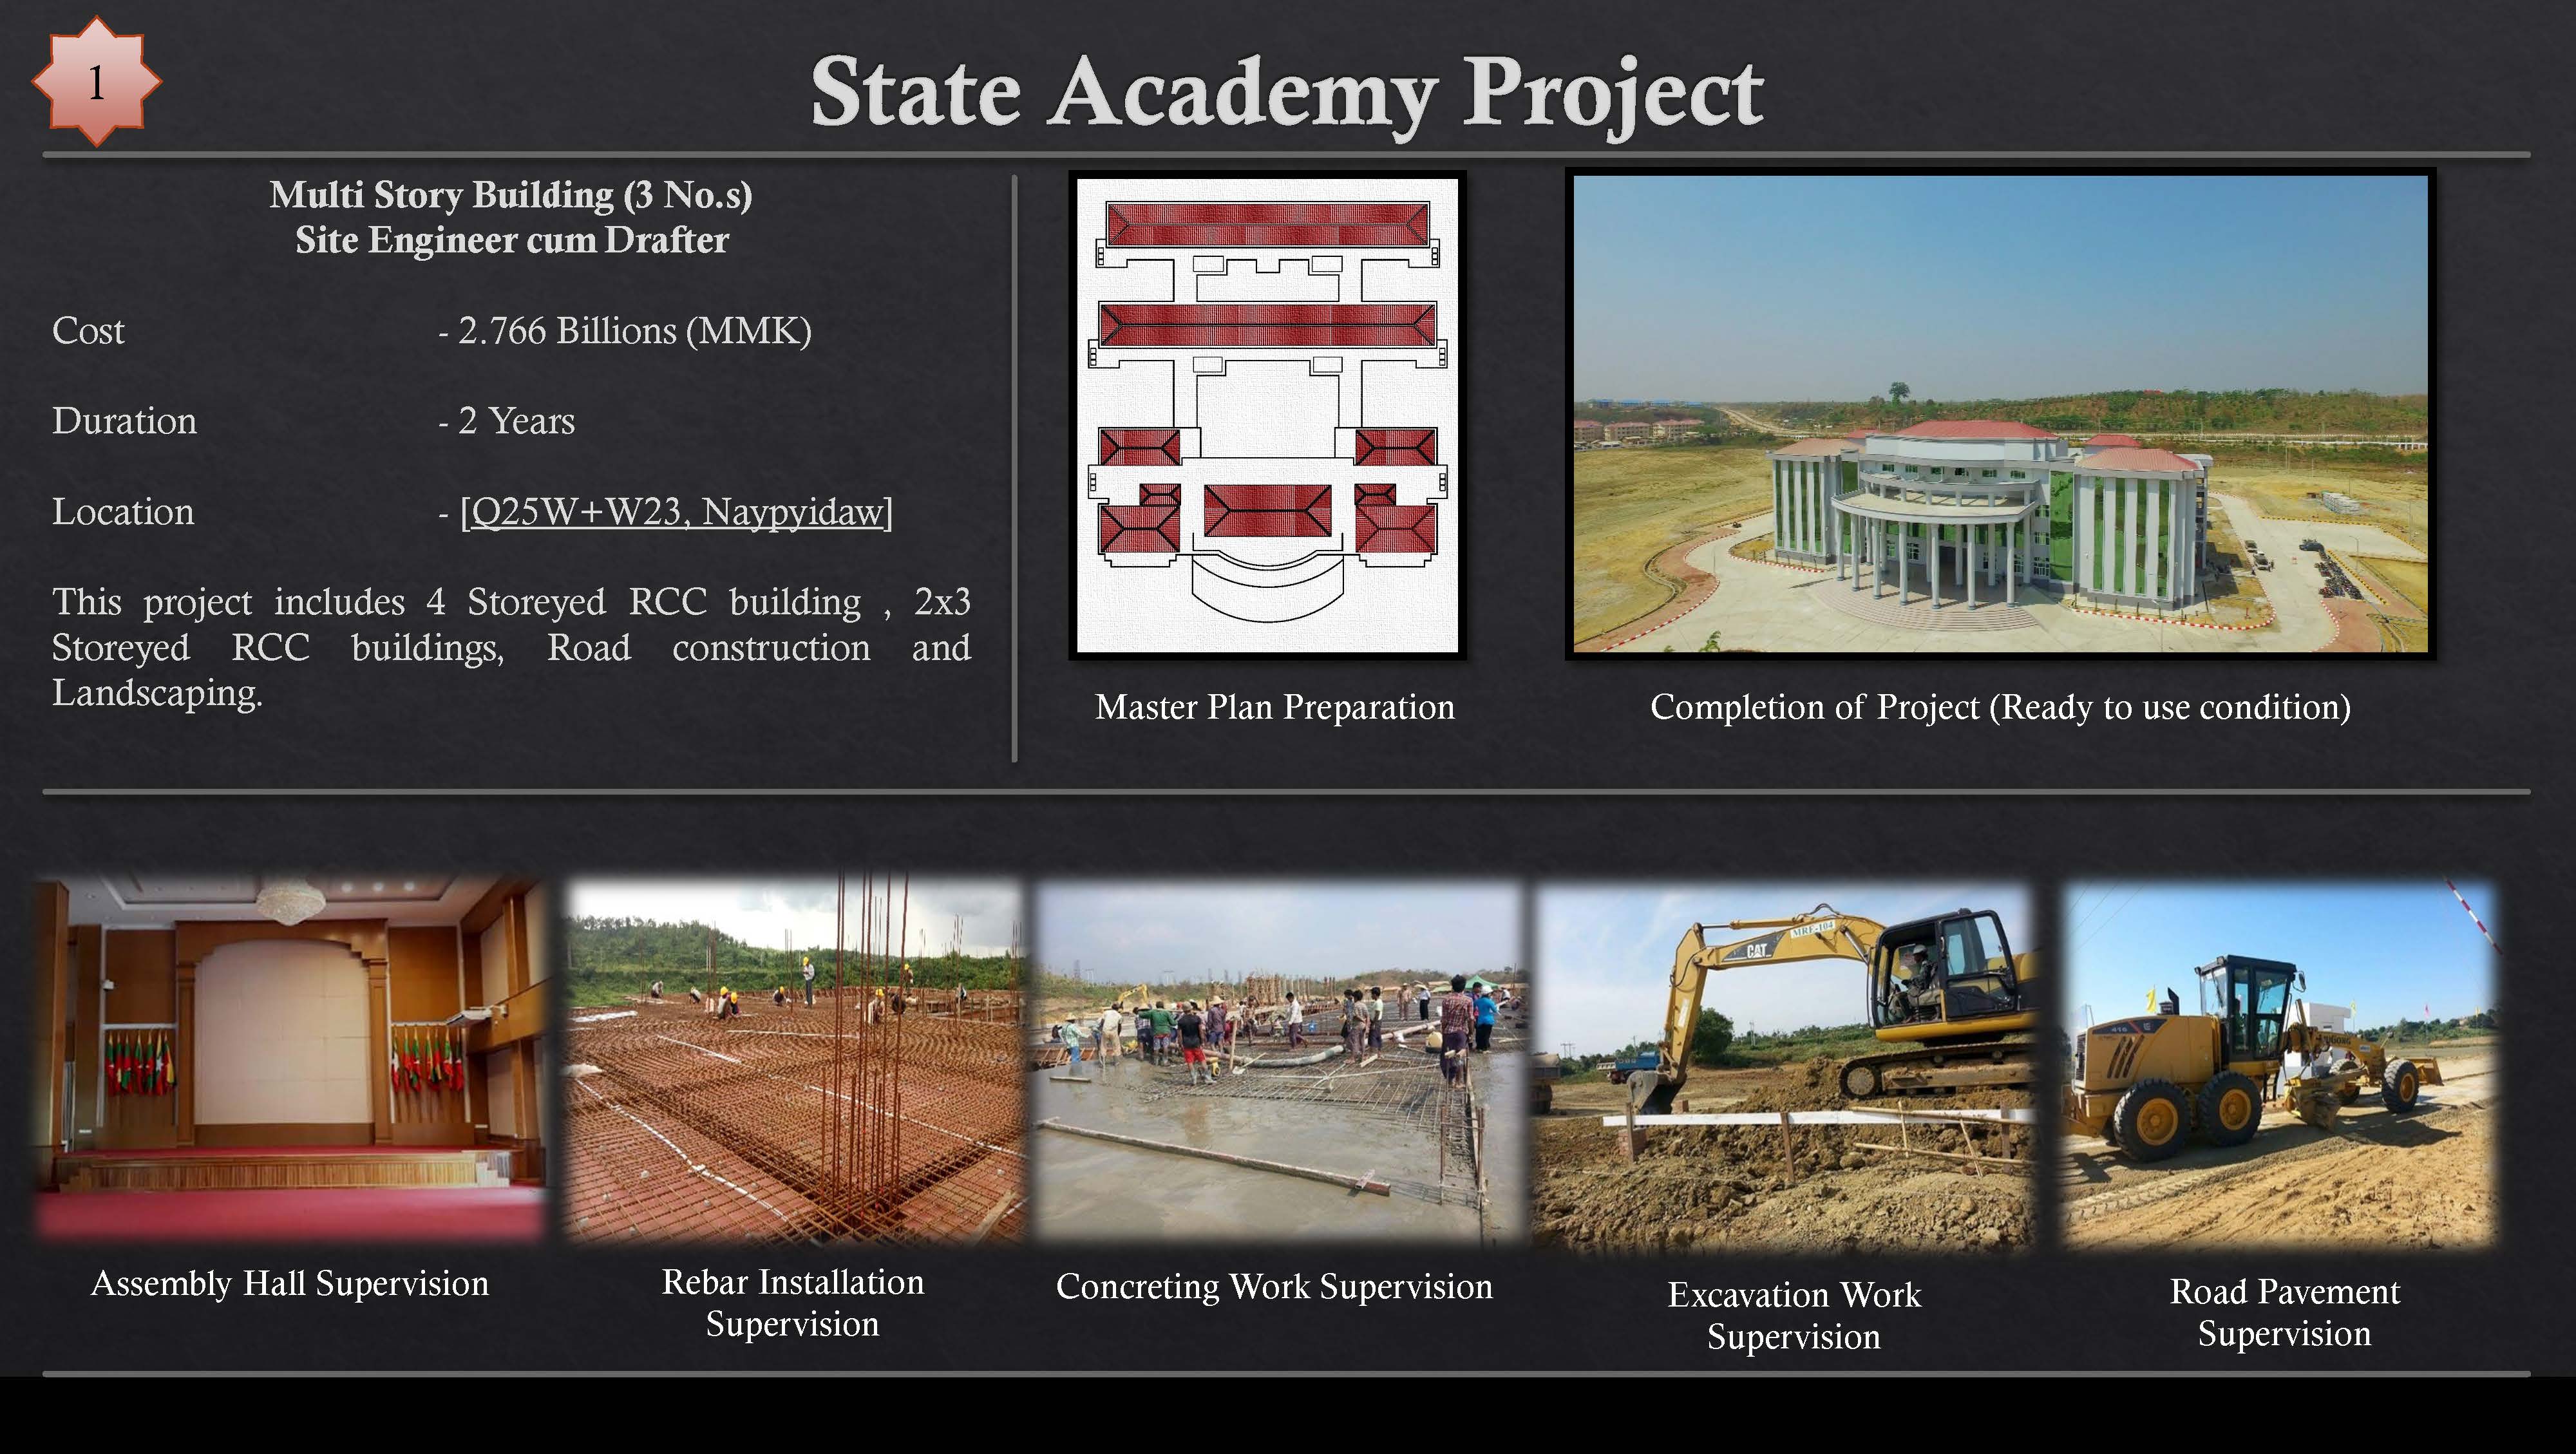 State Academy Project

Multi Story Building (3 No.s)
Site Engineer cum Drafter

 

(Glos - 2.766 Billions (MMK)
Duration WA GENS
Location - [Q25W+W23, Naypyidaw]

This project includes 4 Storeyed RCC building , 2x3
Storeyed RCC buildings, Road construction and
IT ole eT ole 1ed

 

Master Plan Preparation Completion of Project (Ready to use condition)

 

Assembly Hall Supervision Rebar Installation Concreting Work Supervision JRC ate Rea Road Pavement
Silja gyal MINSRYS Supervision